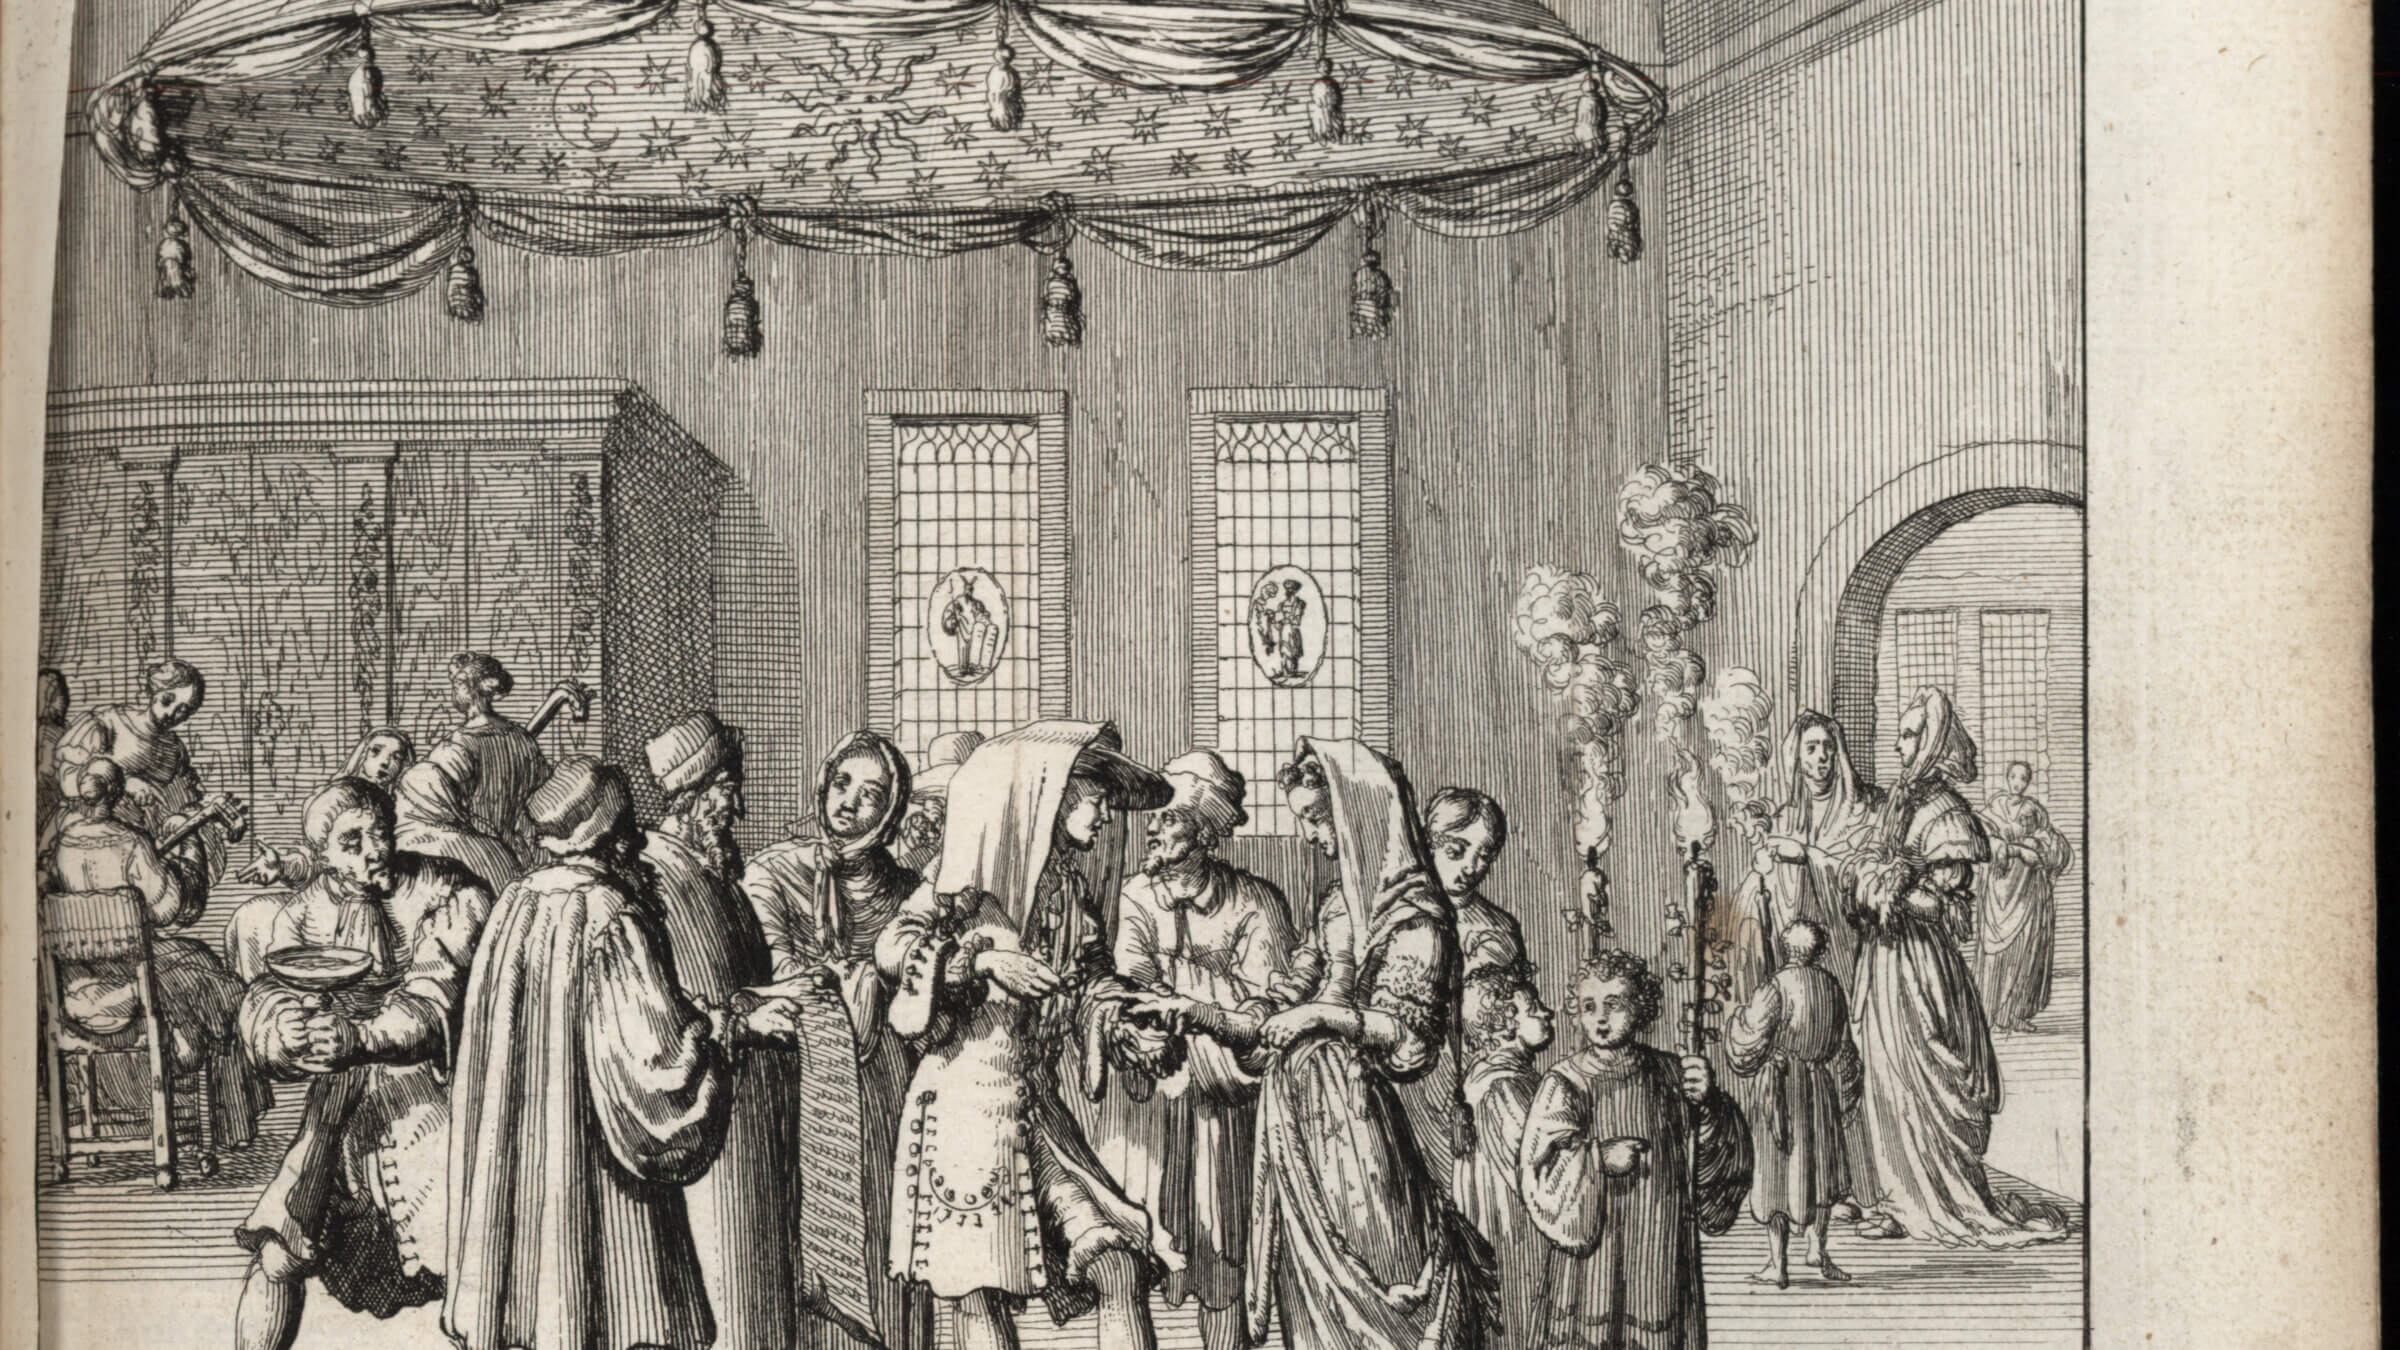 An illustration from a 1683's "Ecclesiastical Customs and Practices" from Amsterdam, translated to Dutch from the original text written by Italian rabbi Leone de Modena. This scene shows the marriage party under a domed, star-embellished "huppah."
